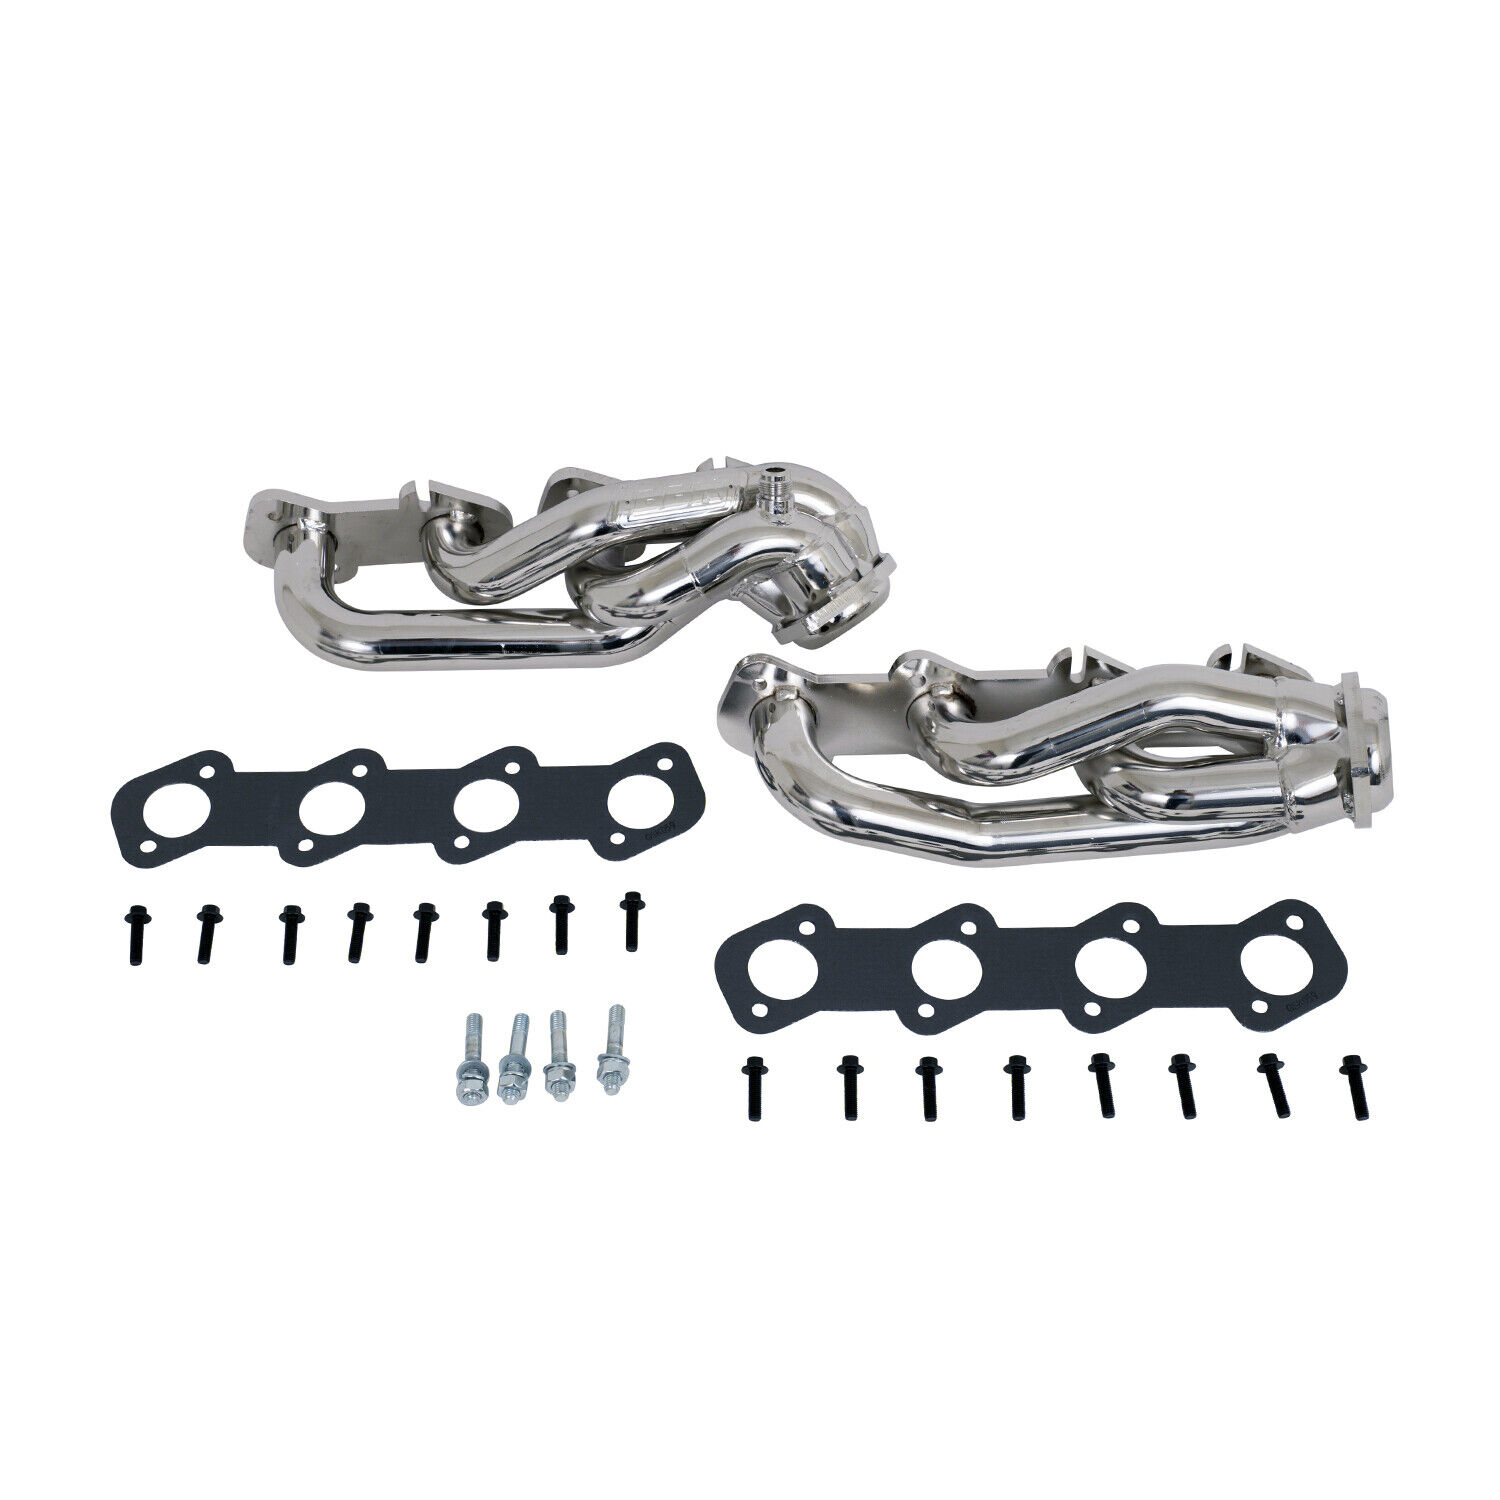 BBK for 97-03 Ford F Series Truck 4.6 Shorty Tuned Length Exhaust Headers -